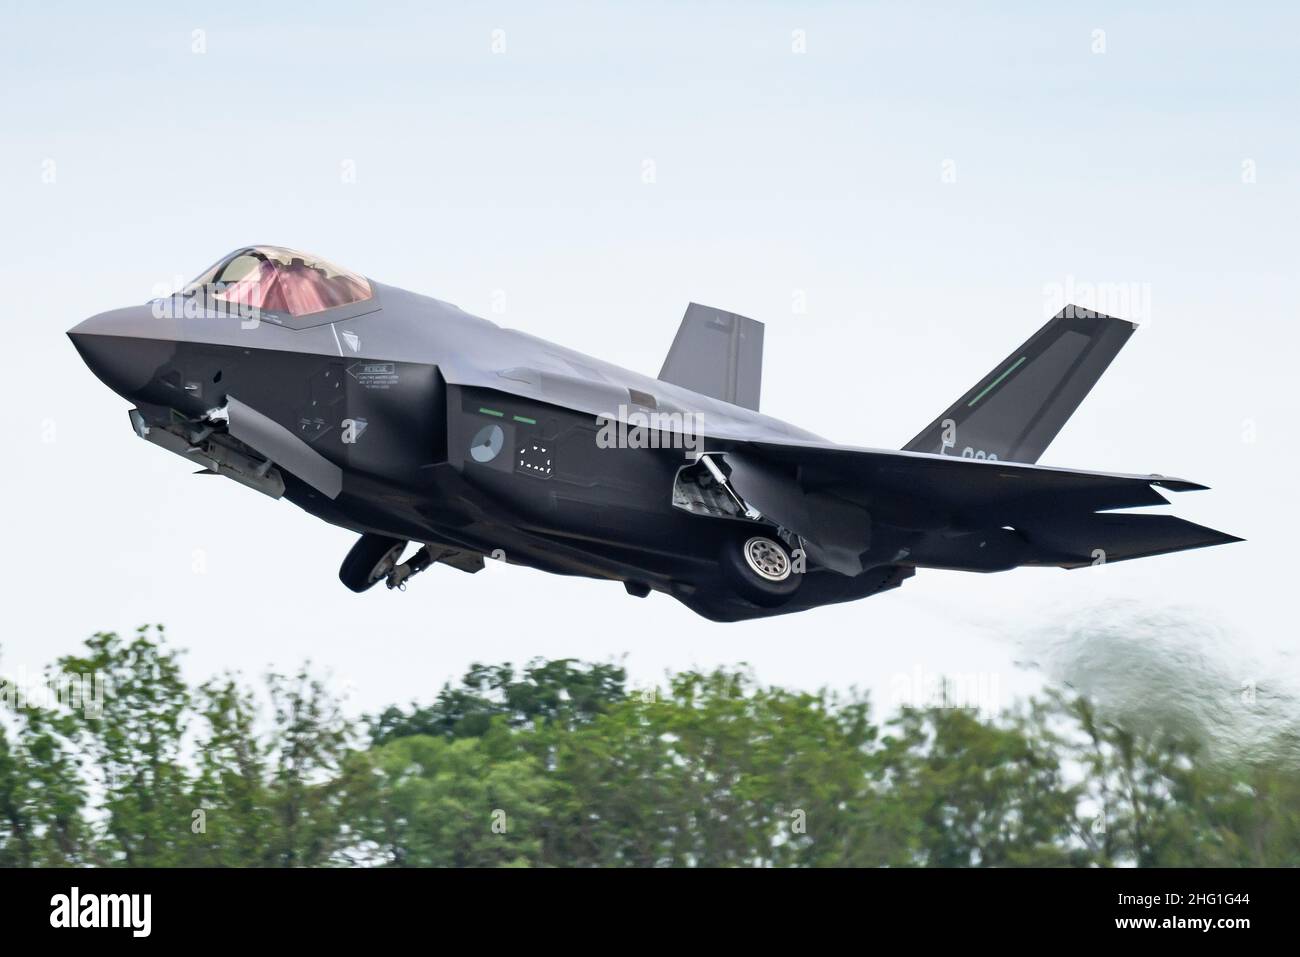 A Lockheed Martin F-35 Lightning II stealth fighter jet of the Royal Netherlands Air Force. Stock Photo